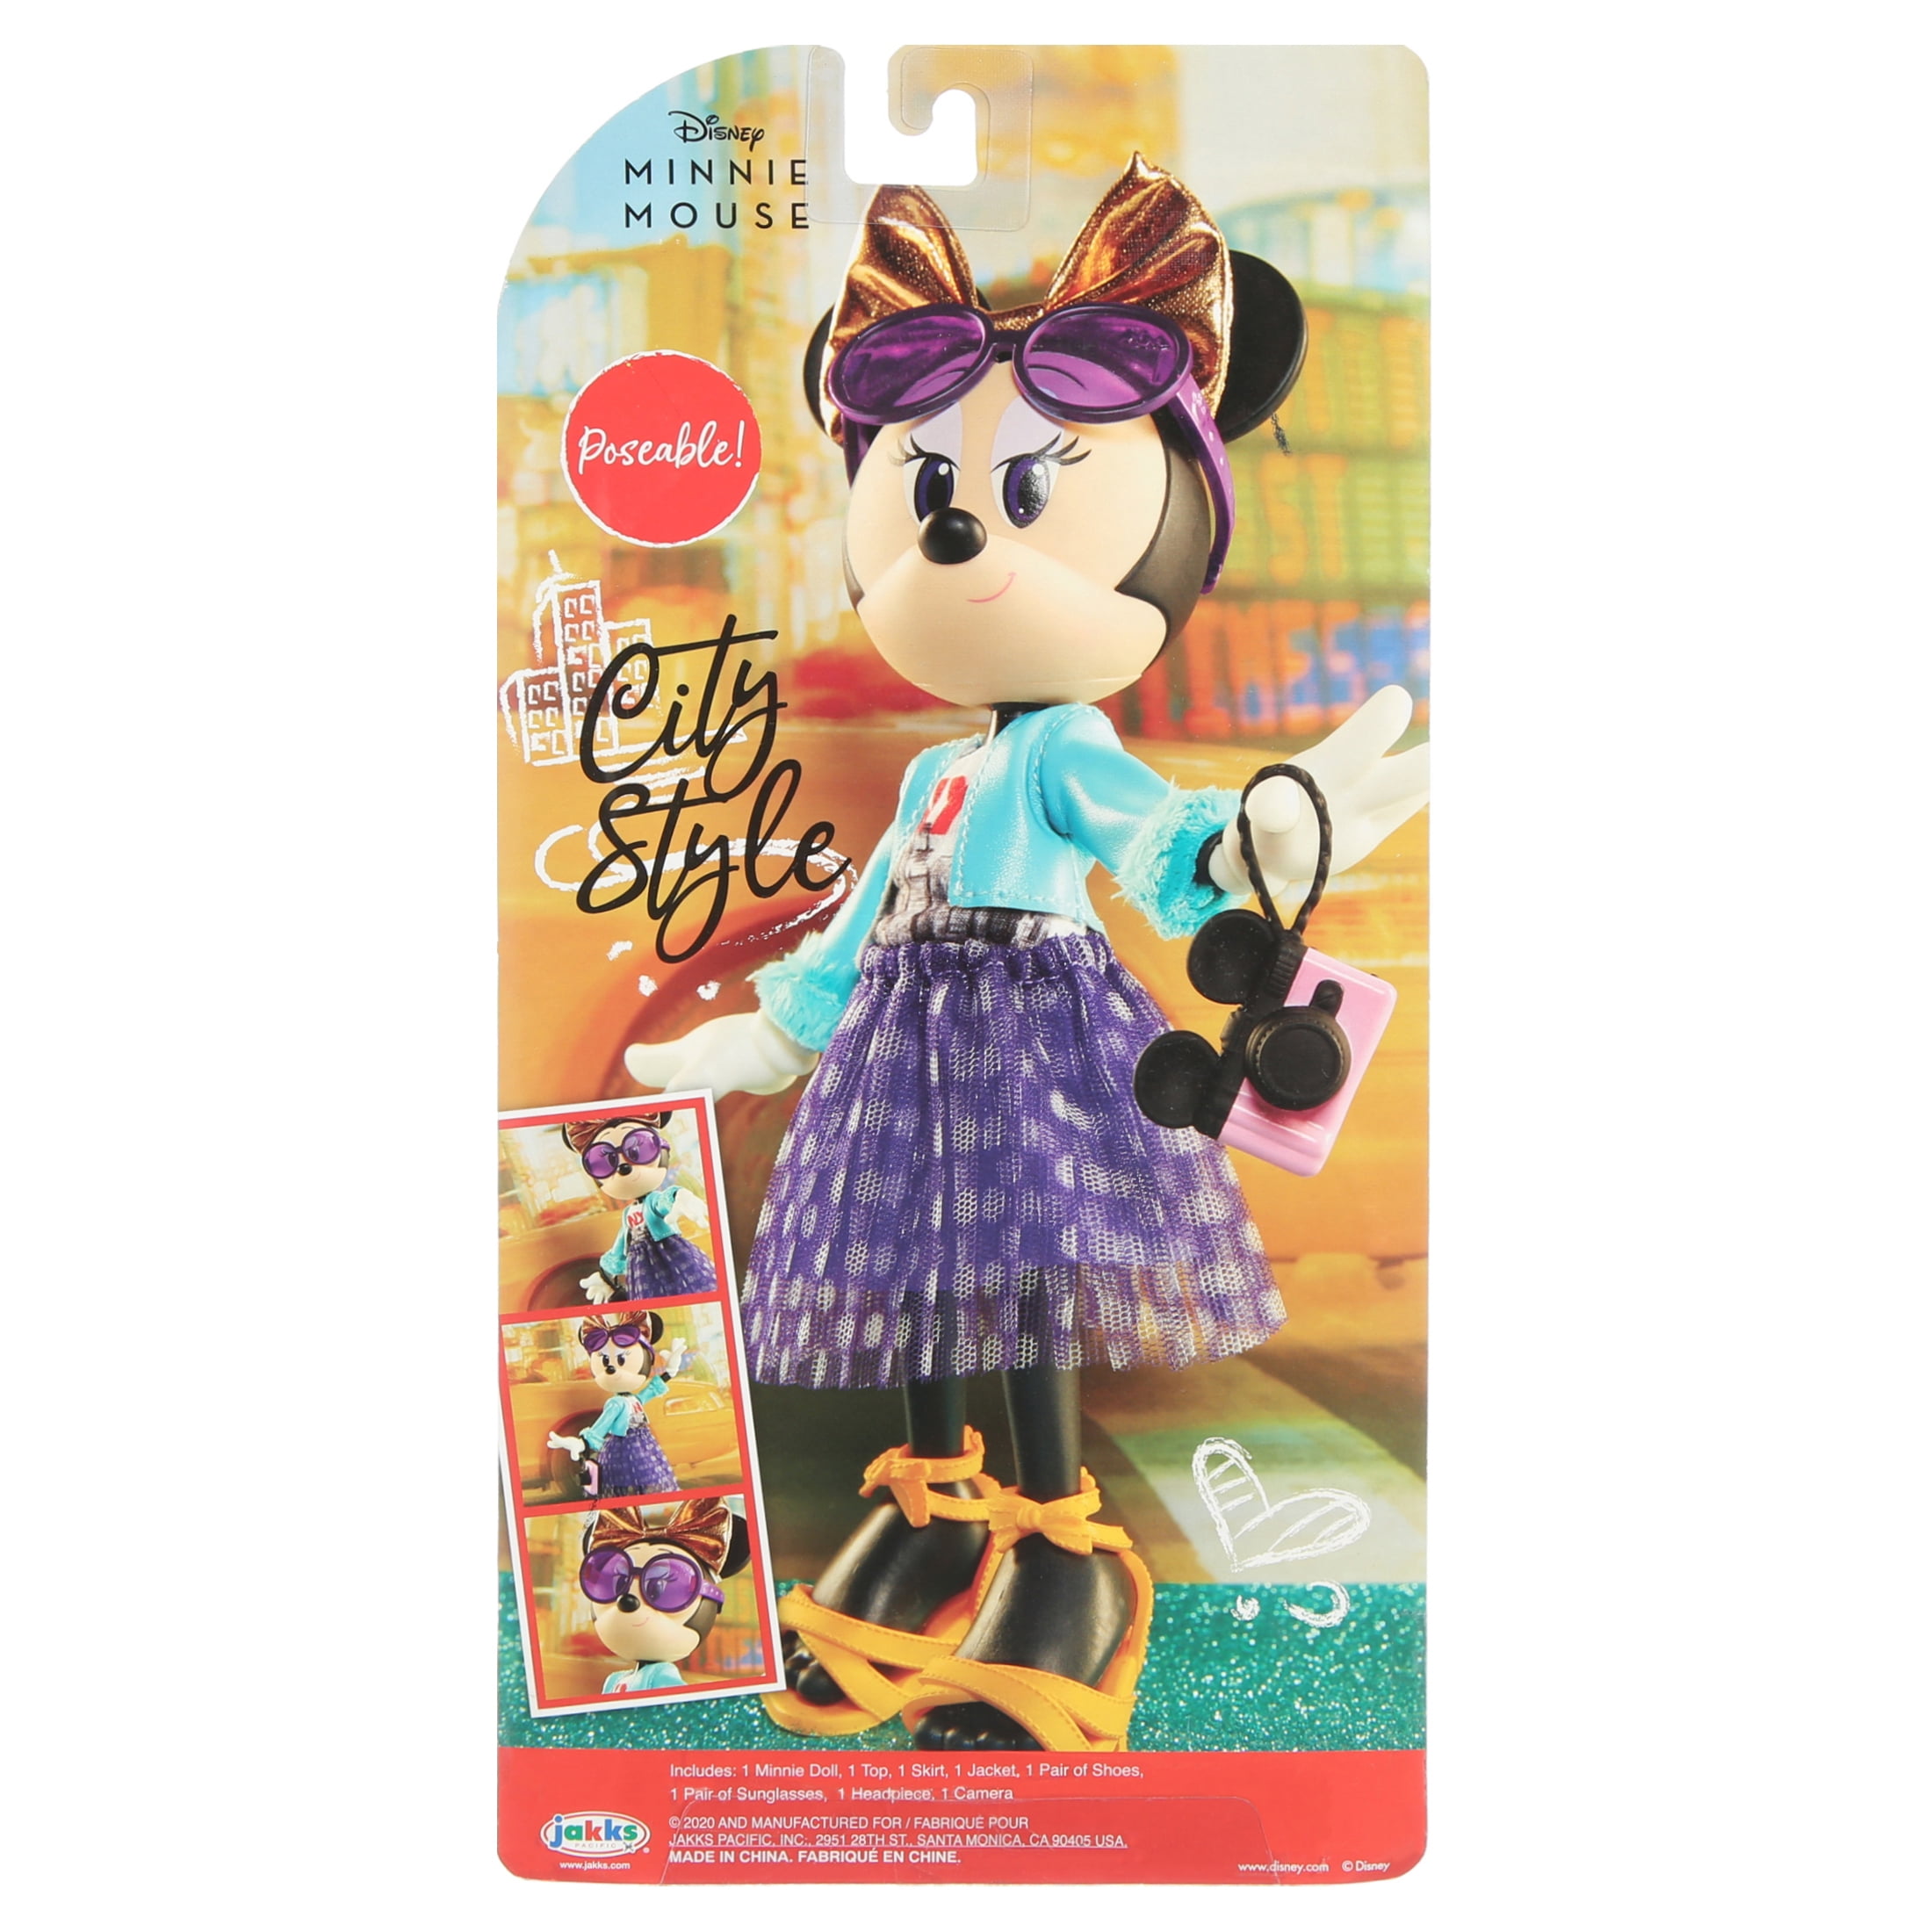 Minnie Mouse City Style Disney Poseable Fashion Doll 10" 2020 for sale online 